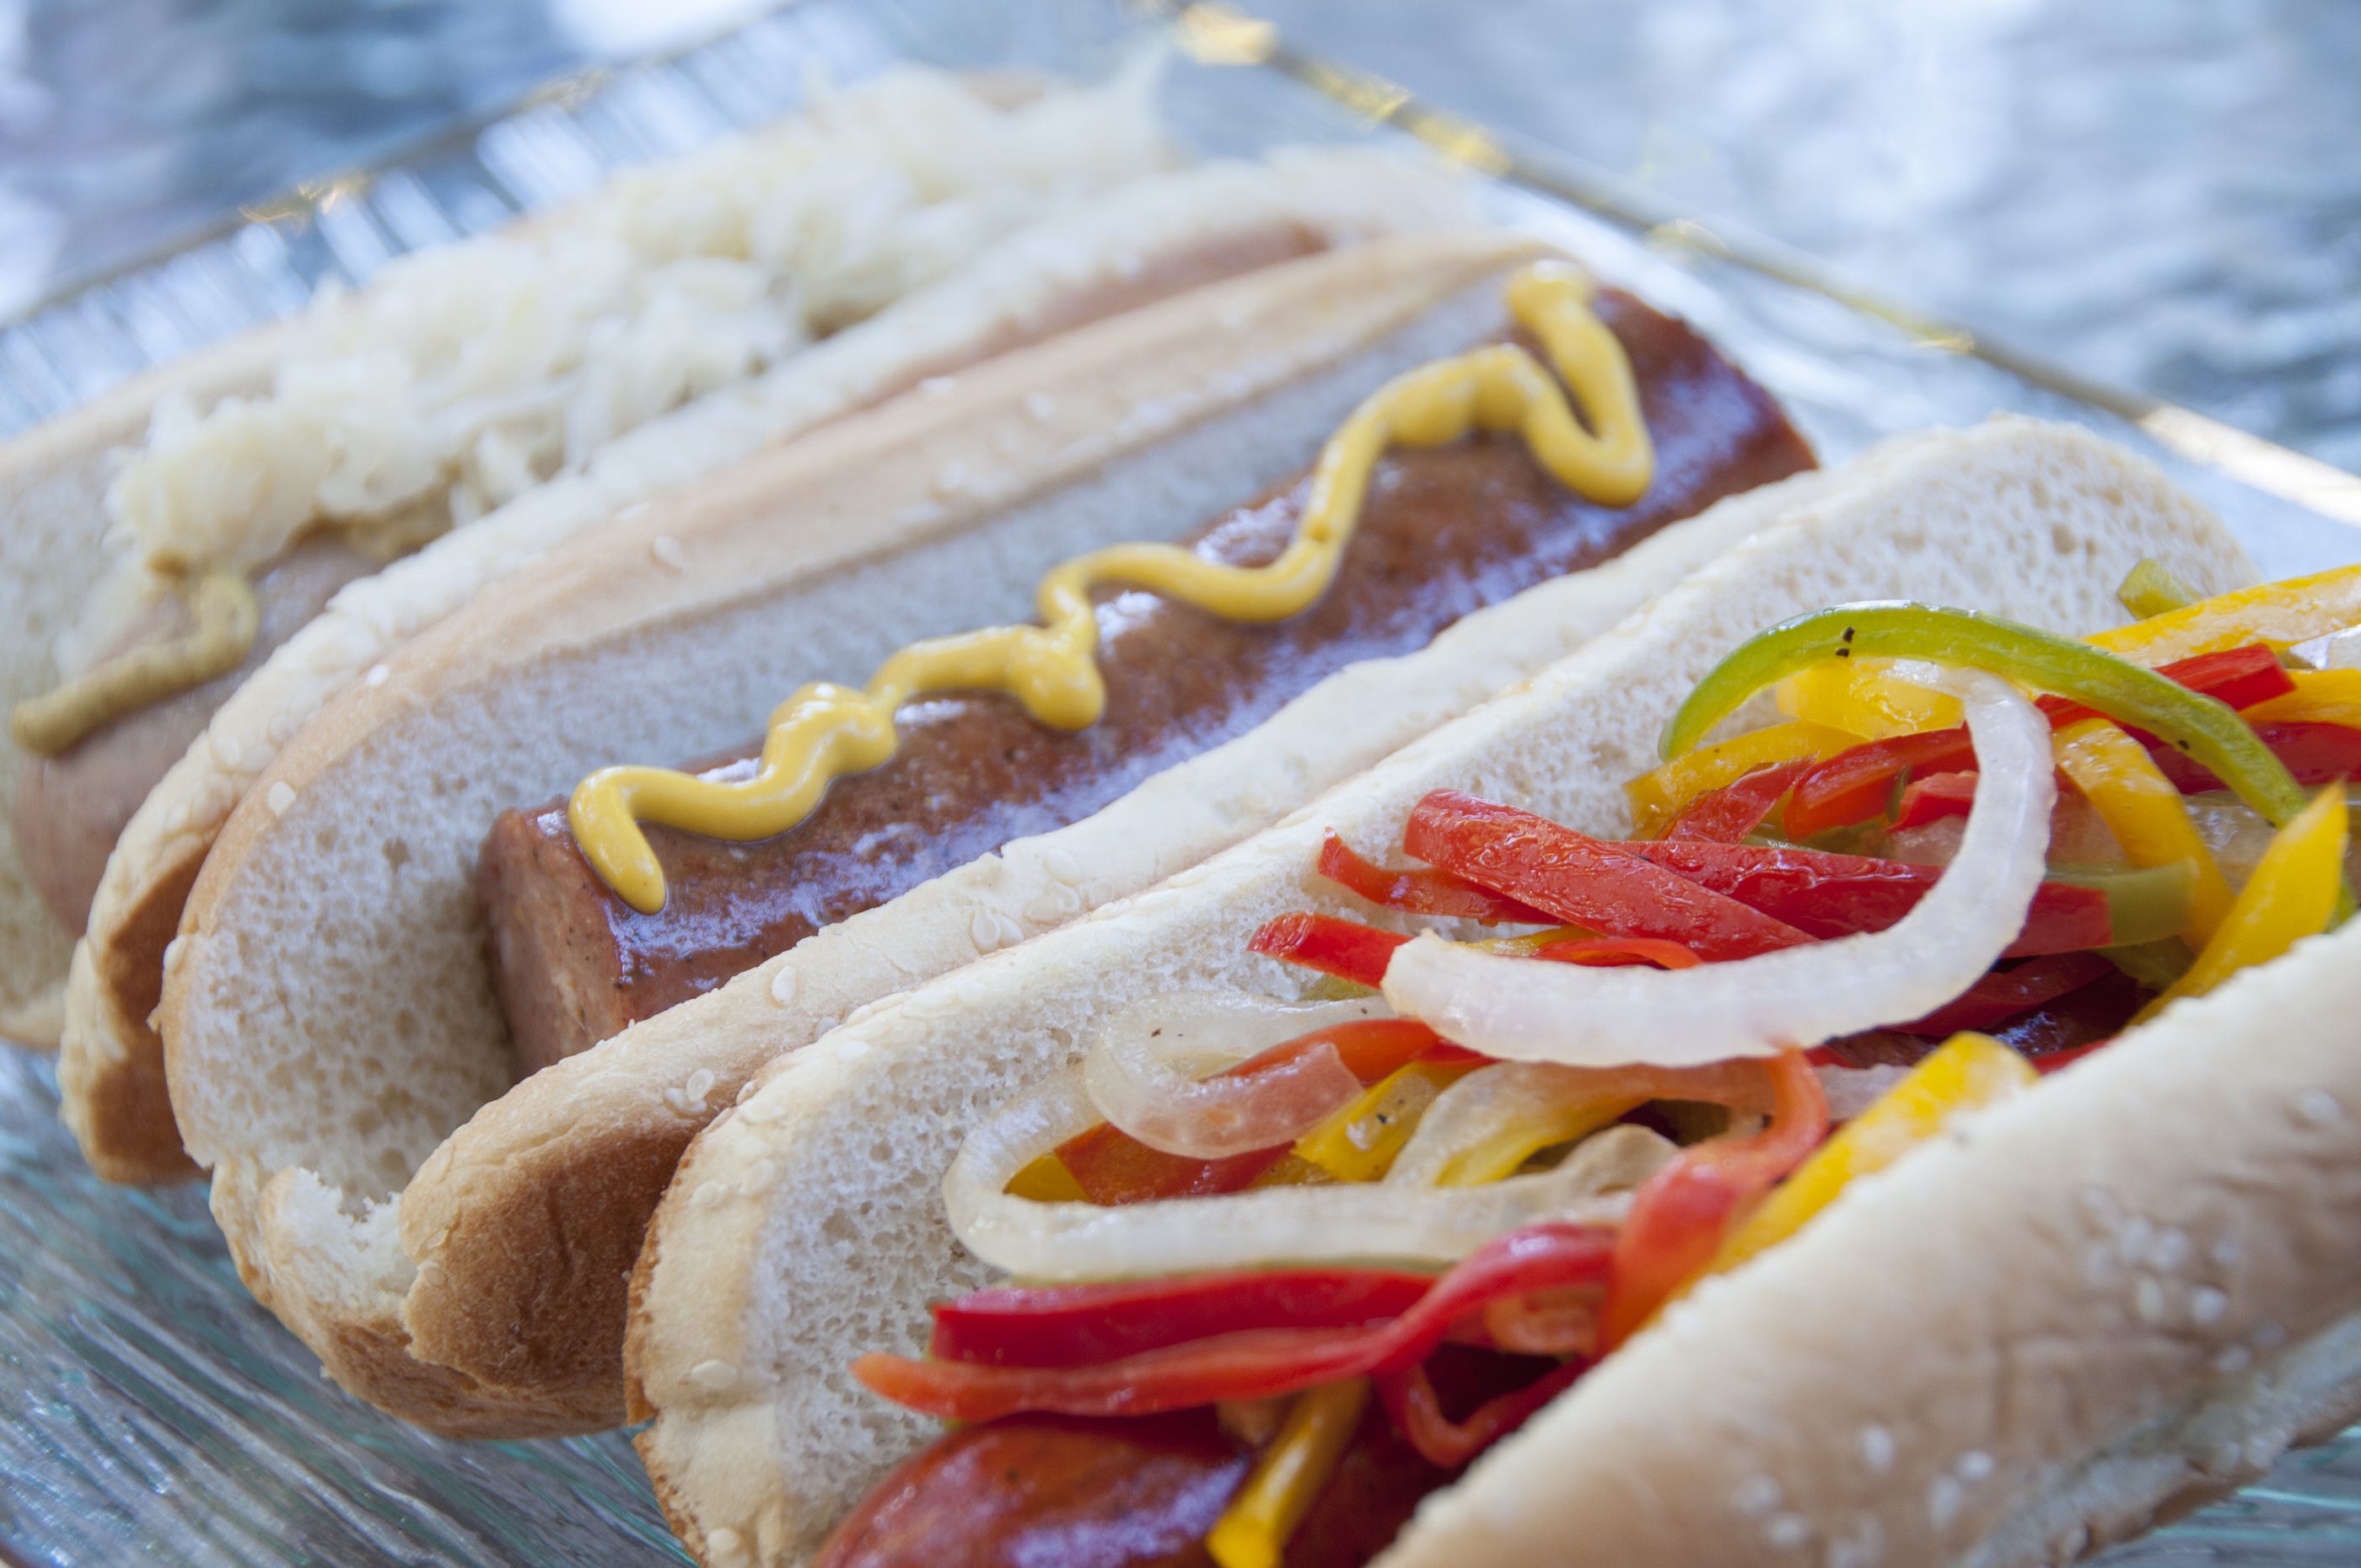 How long to boil hot dogs? Cooking tips and more on these favorite franks